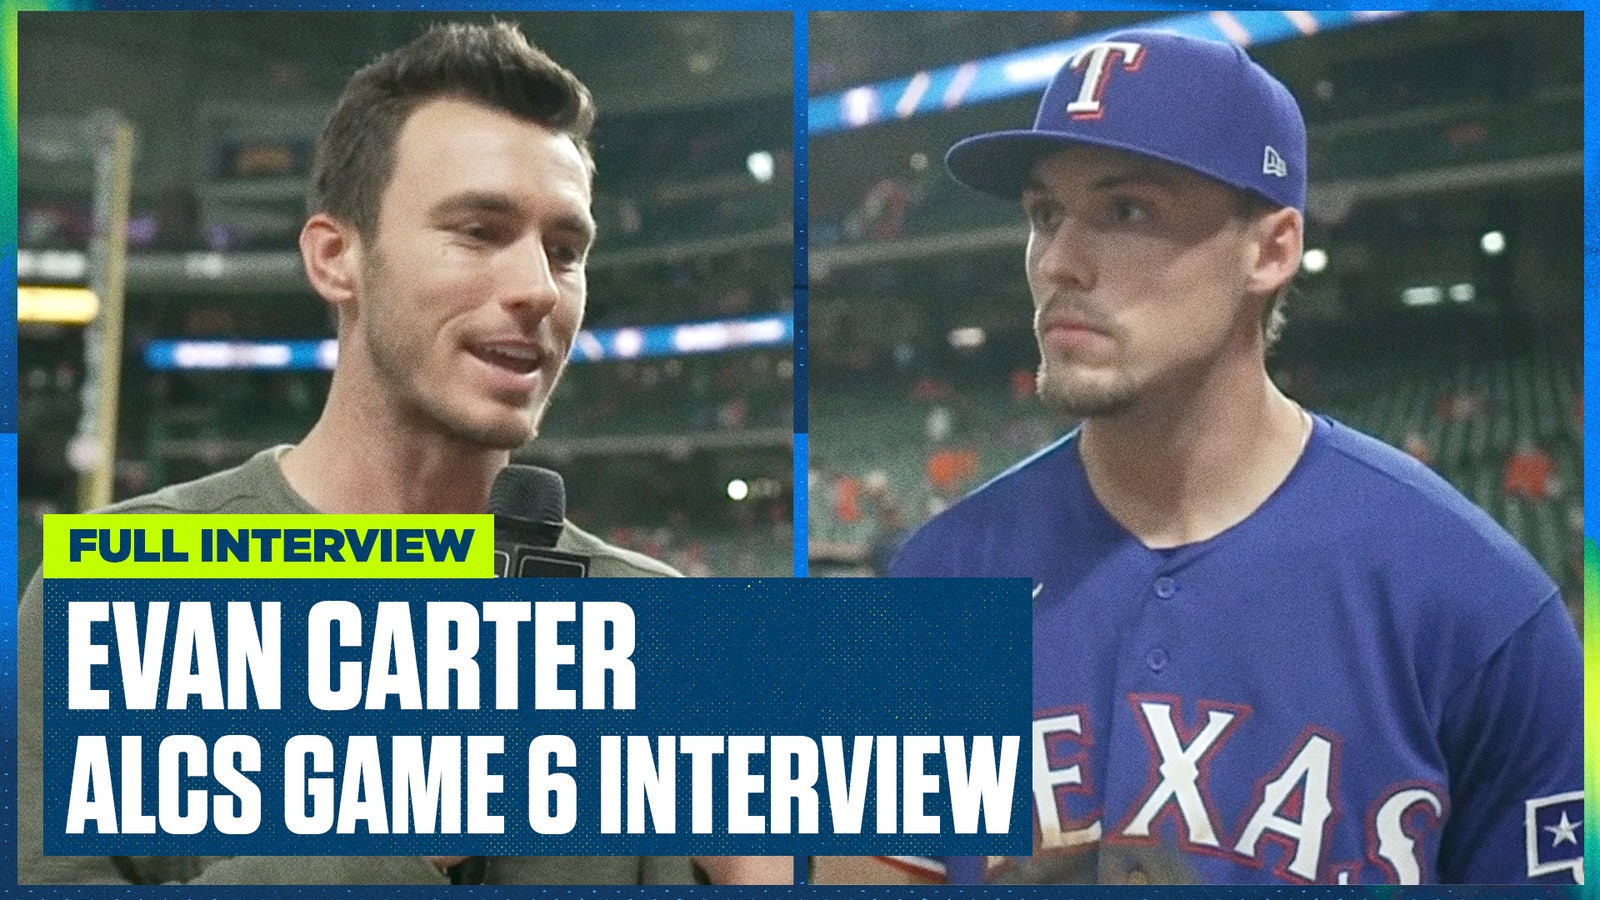 Texas Rangers' Evan Carter on their HUGE ALCS Game 6 win & heading into a Game 7